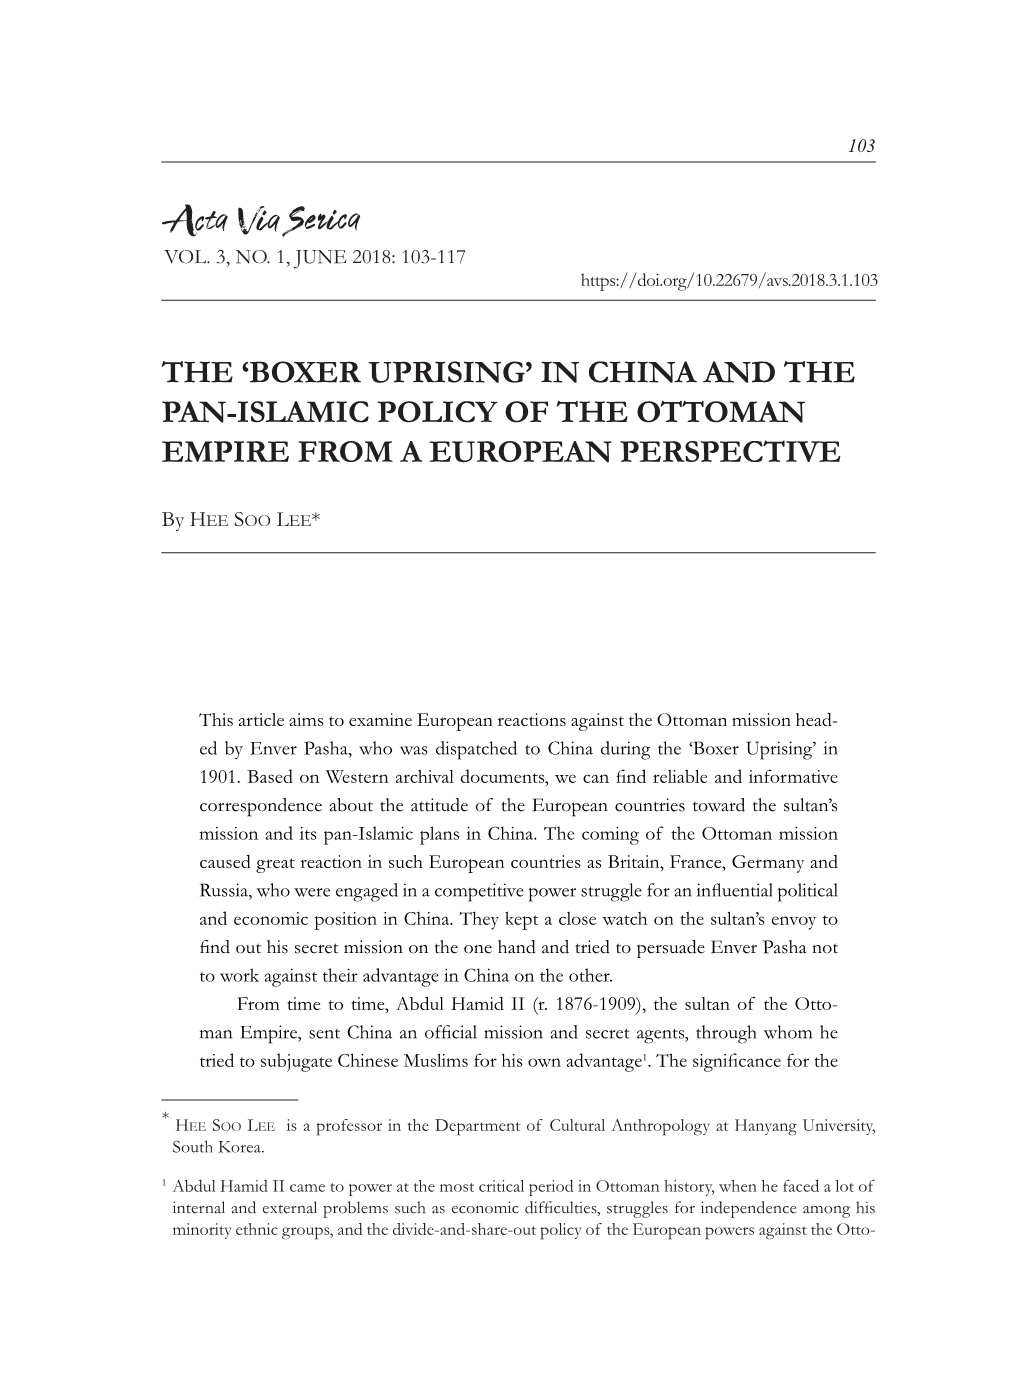 'Boxer Uprising' in China and the Pan-Islamic Policy Of